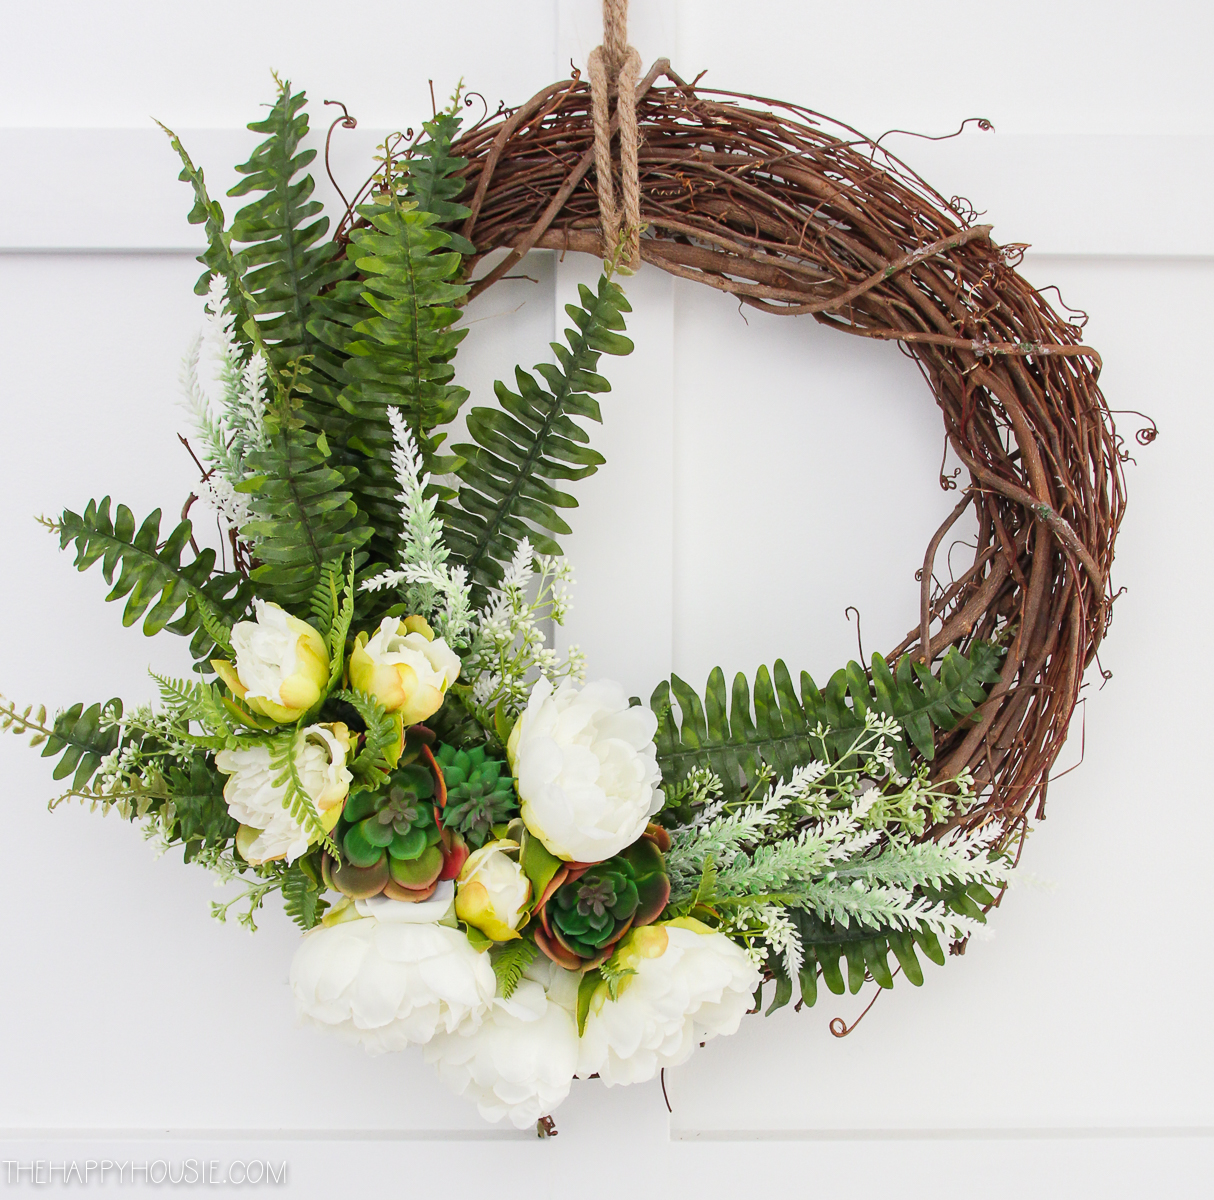 Grapevine wreath with fern, and white flowers.